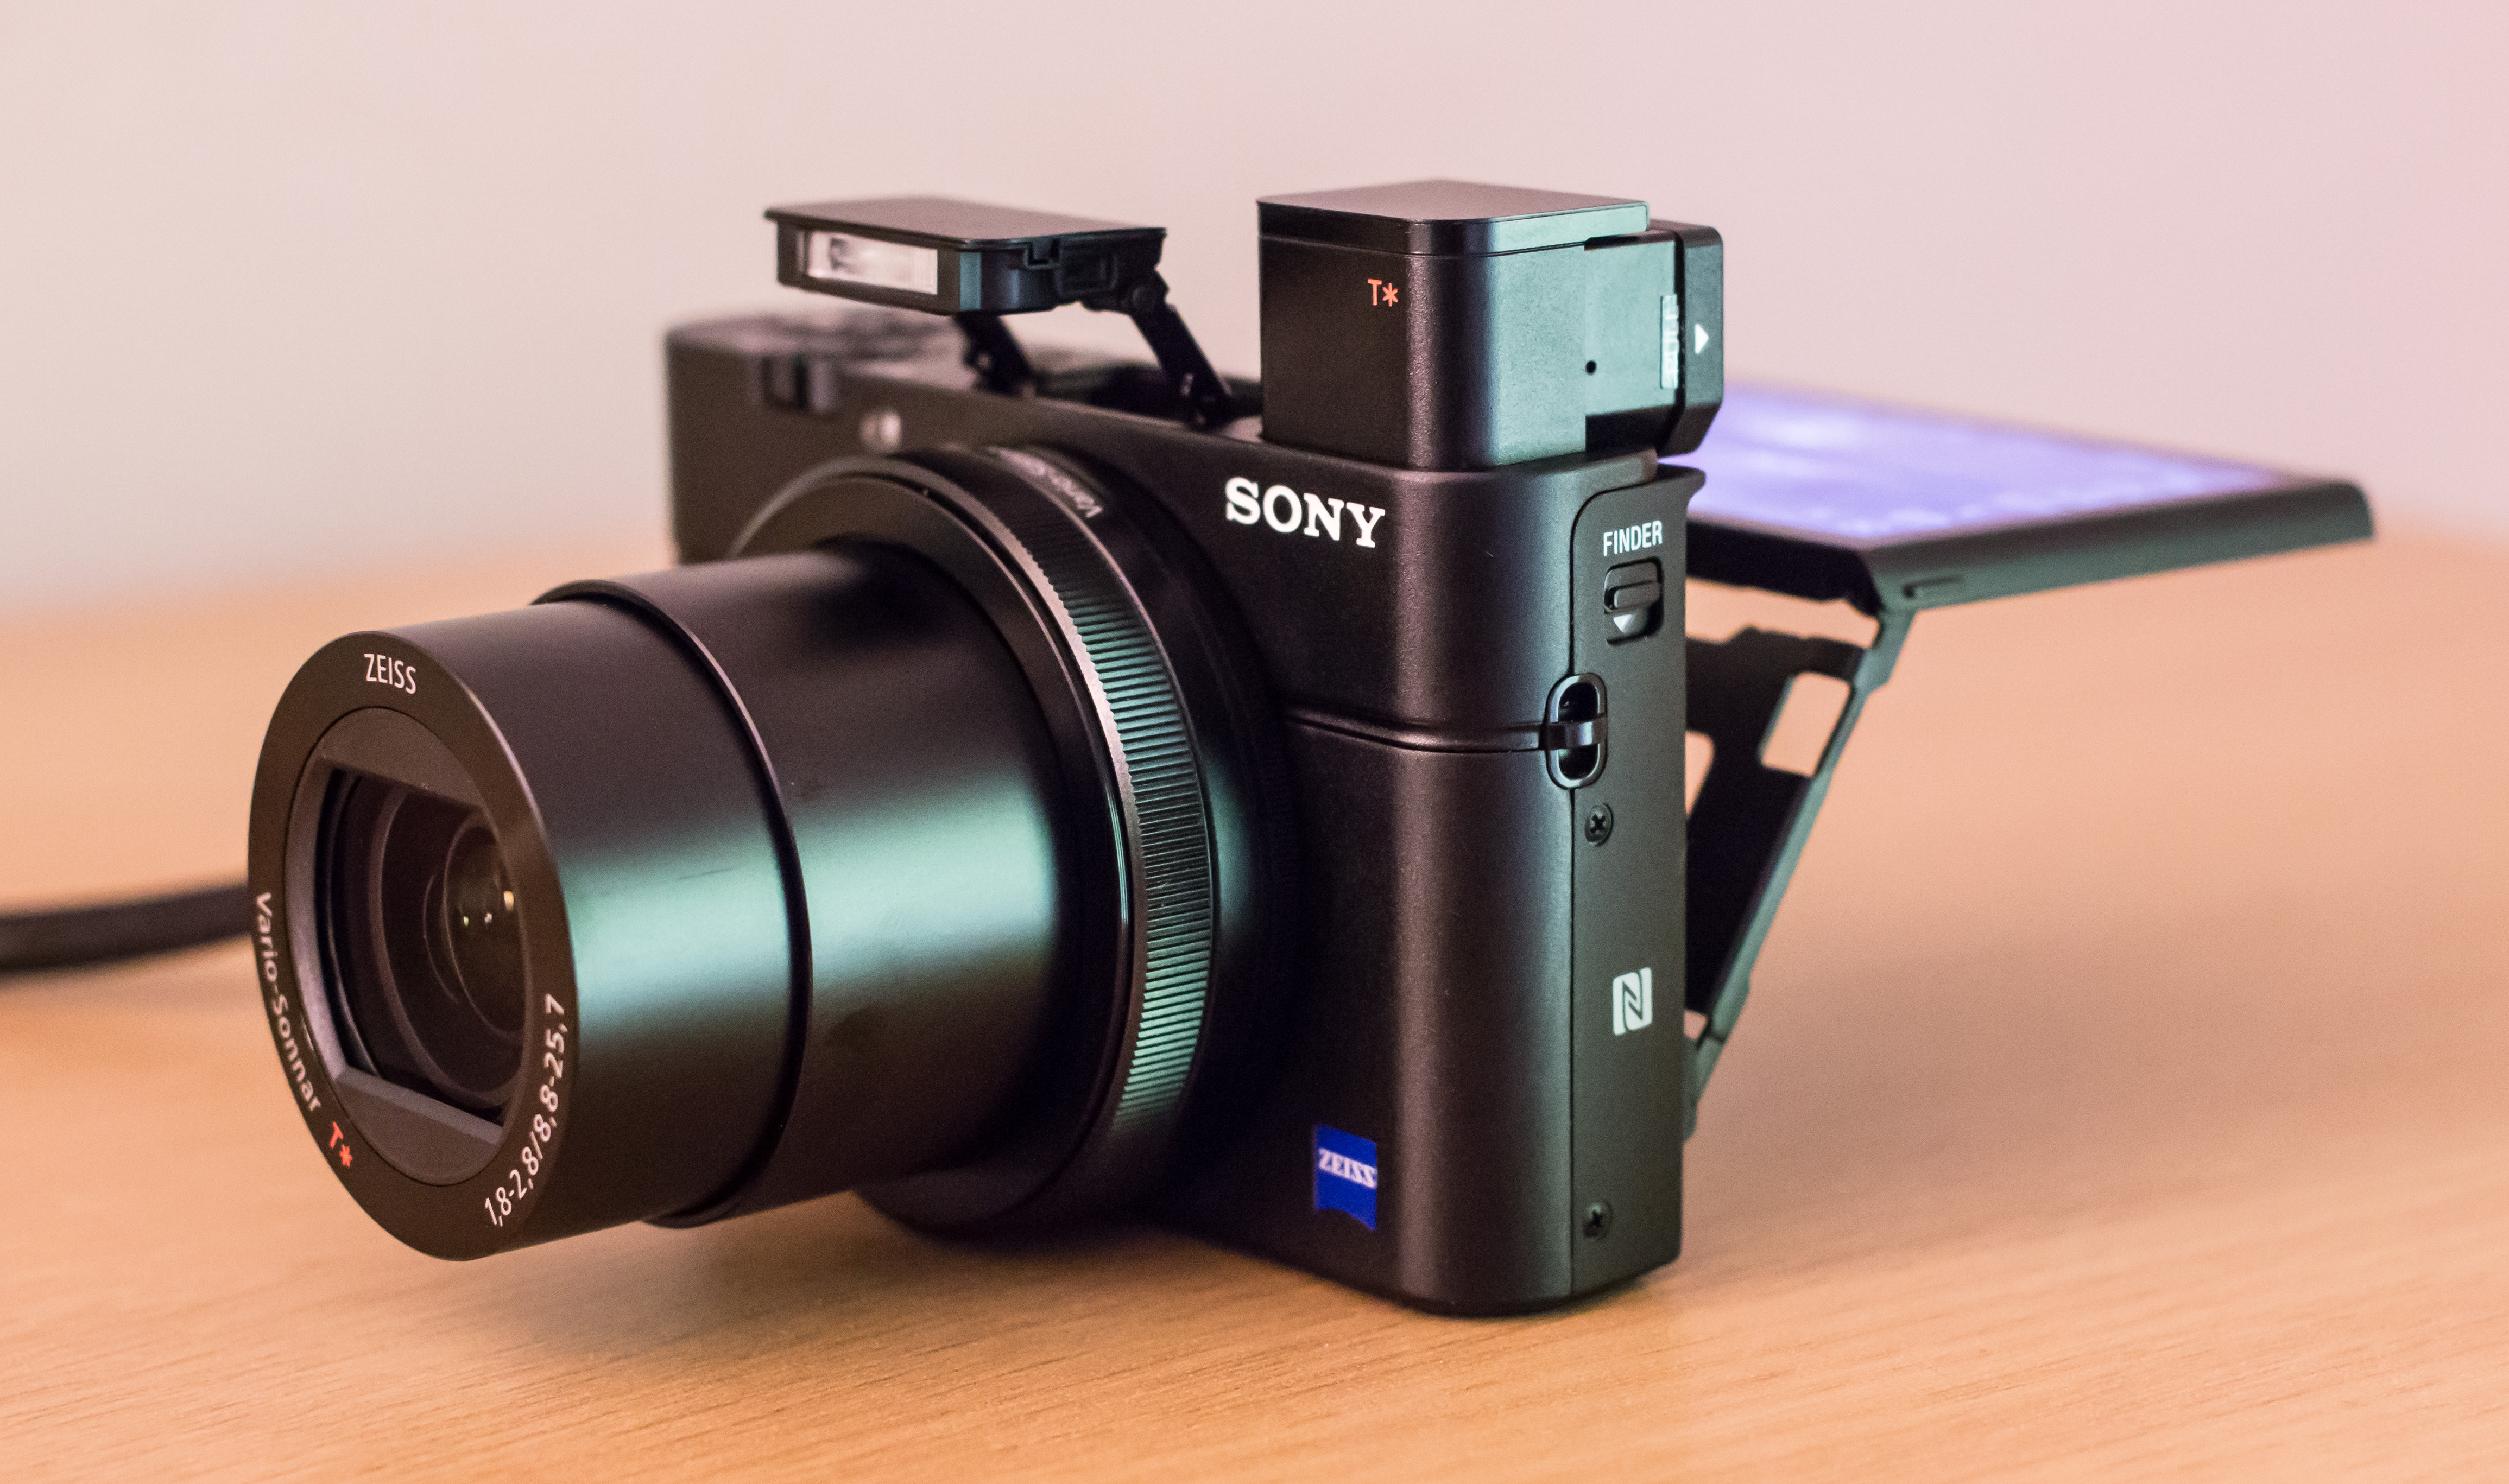 File:Sony RX100 III Physical Features.jpg - Wikimedia Commons